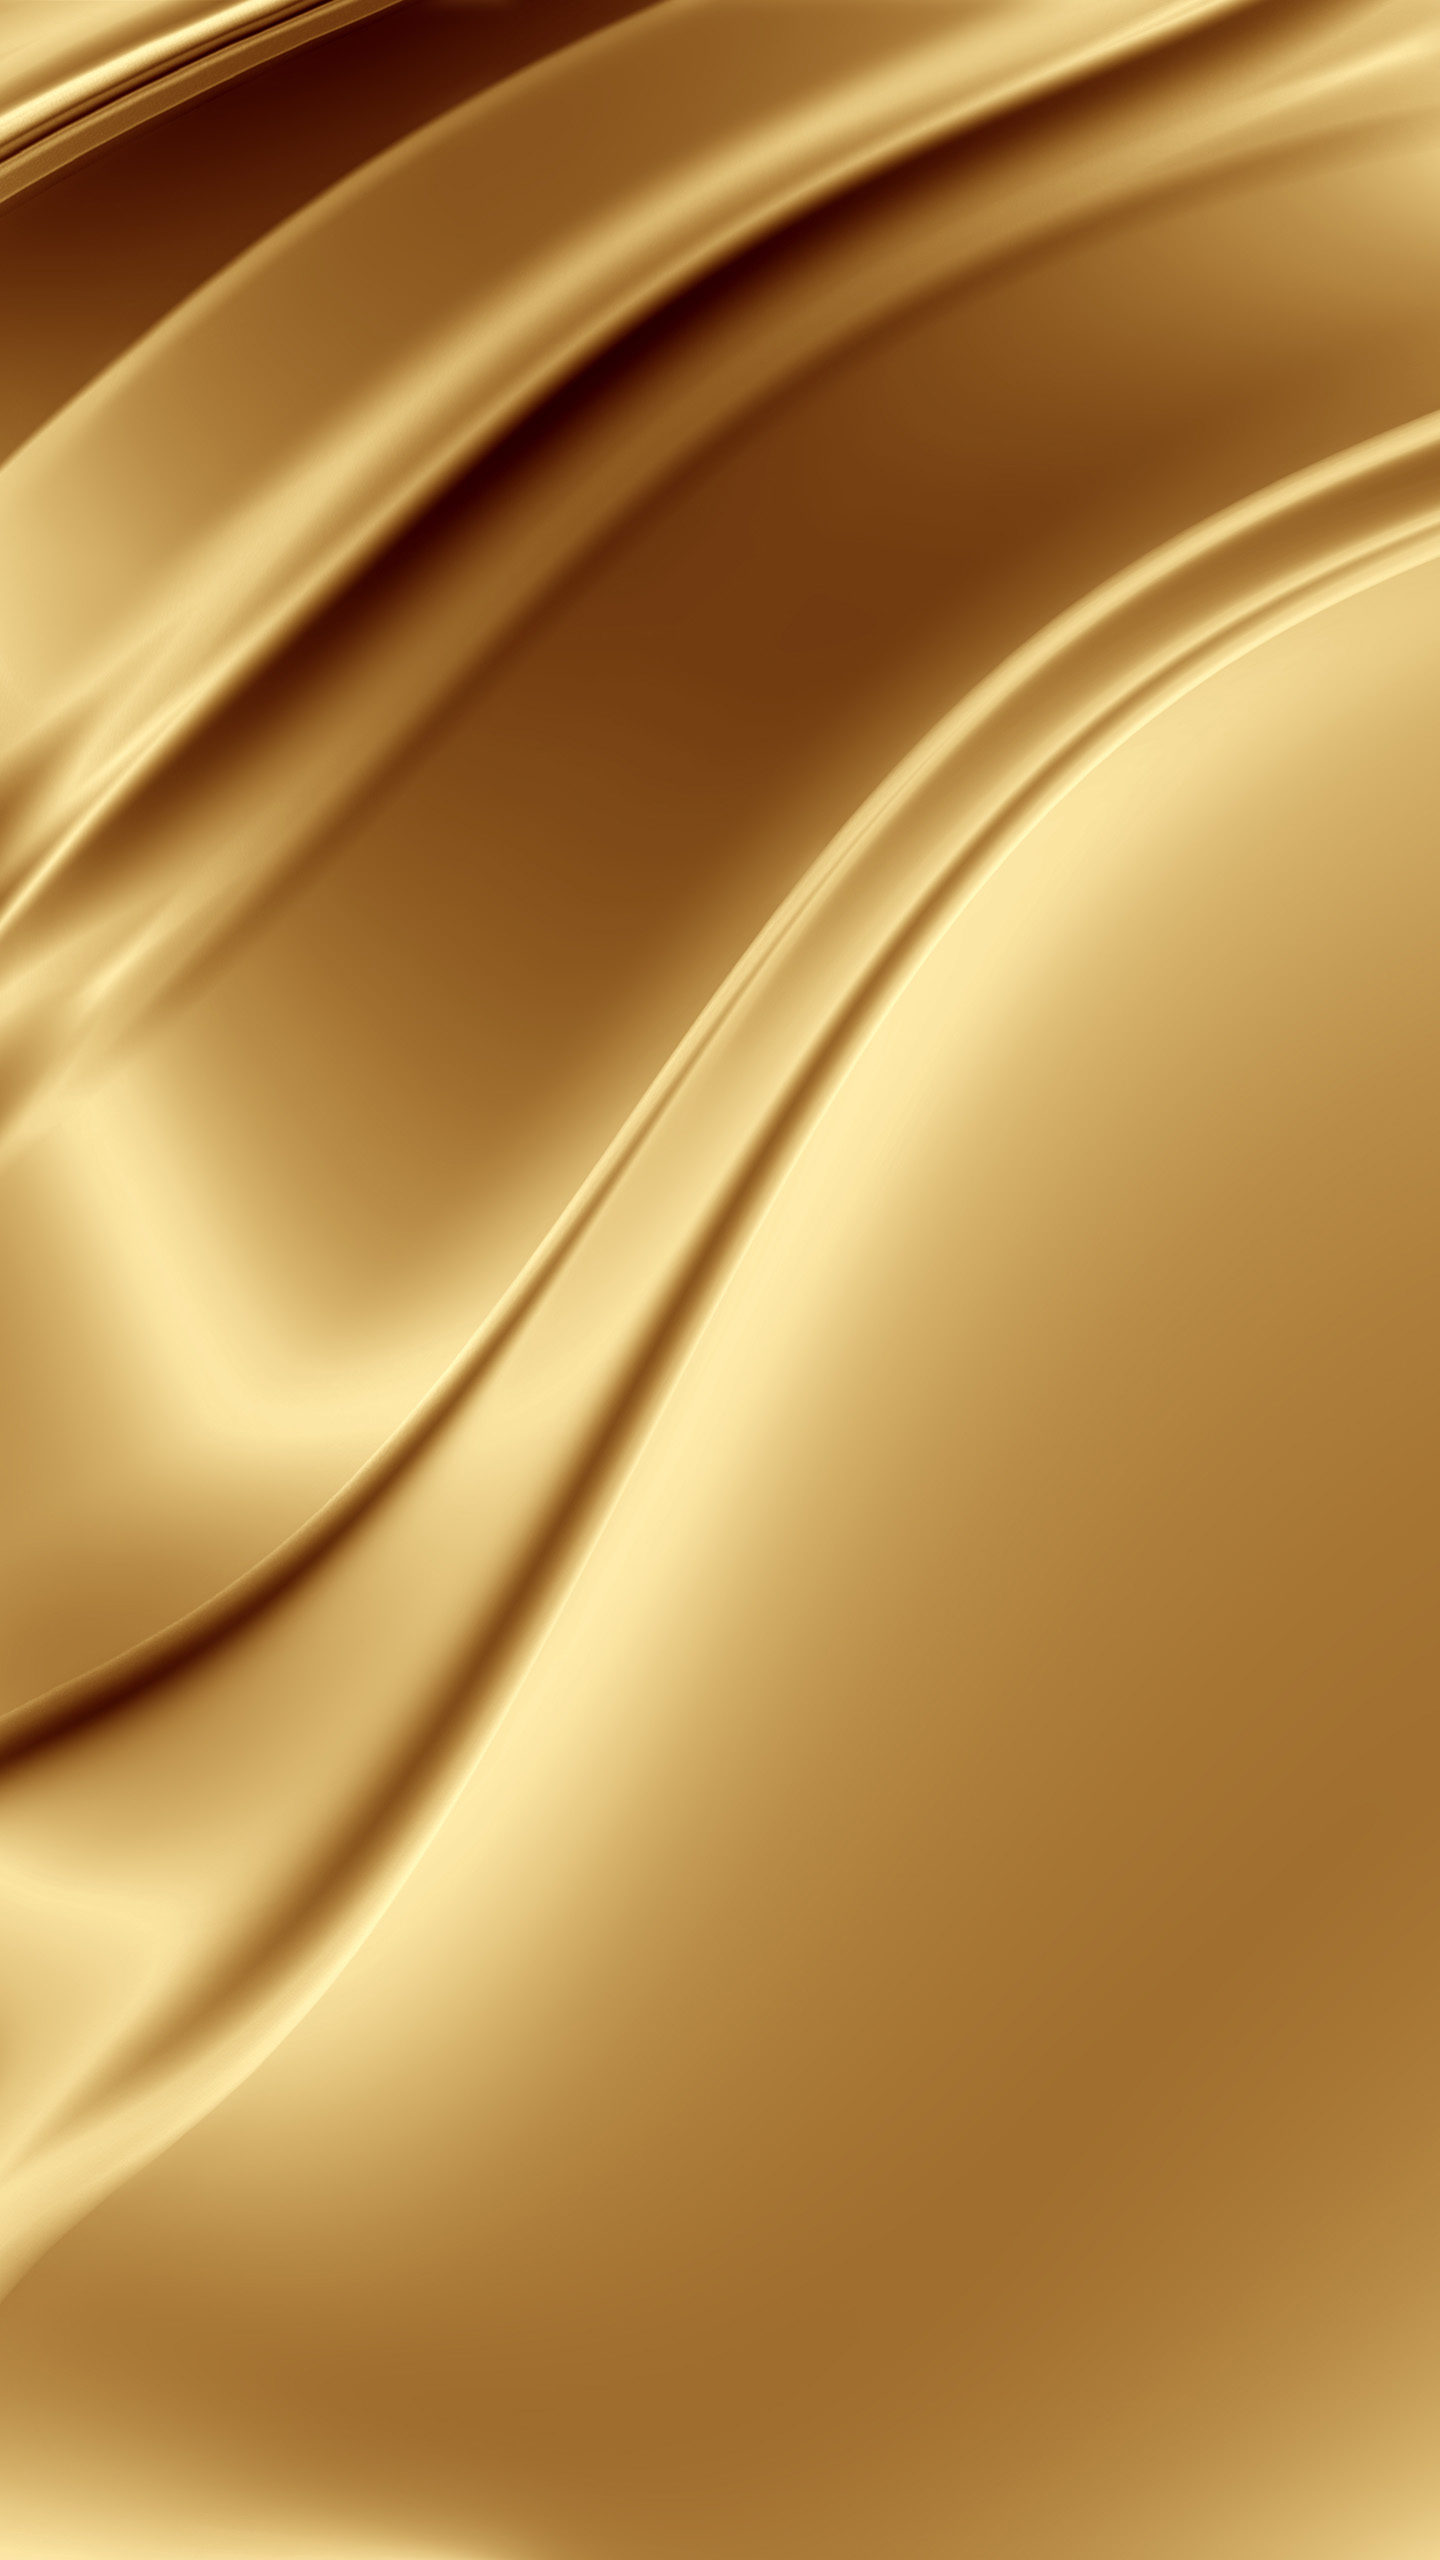 Golden Cool Wallpapers Full HD HD Wallpapers Backgrounds Images